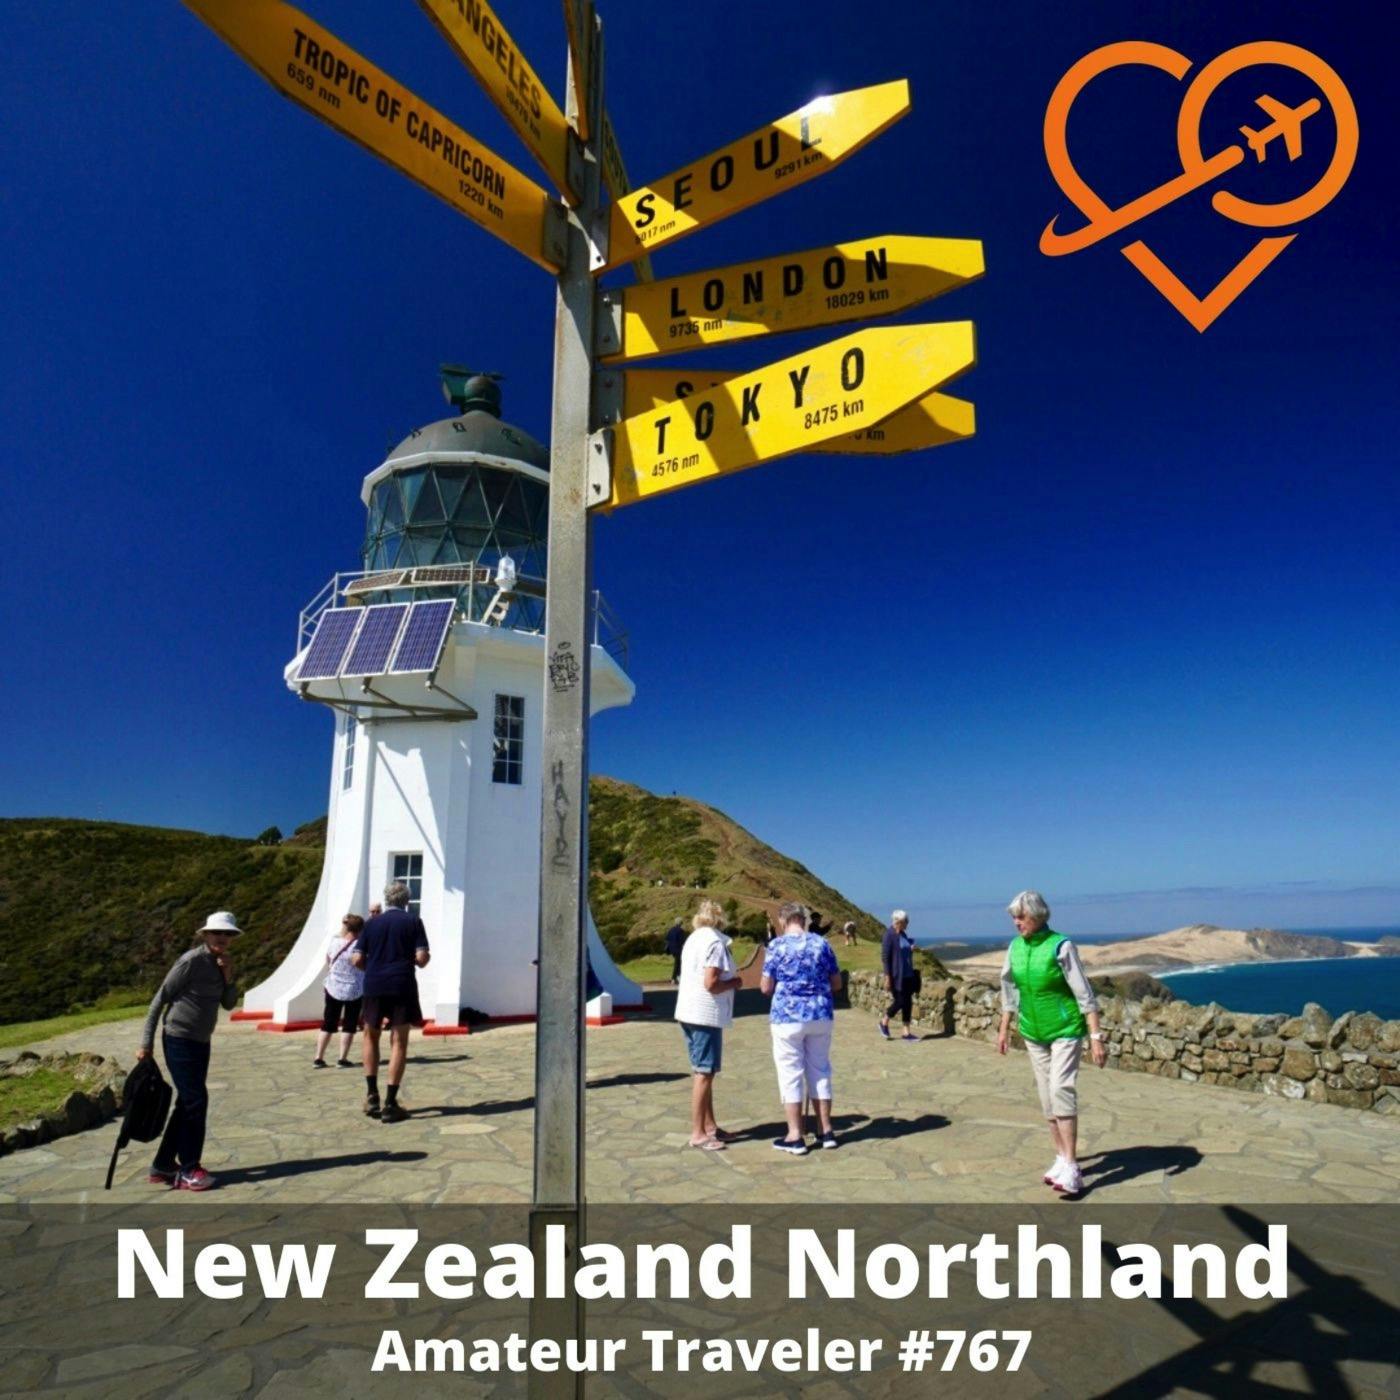 AT#767 - Travel to the New Zealand Northland